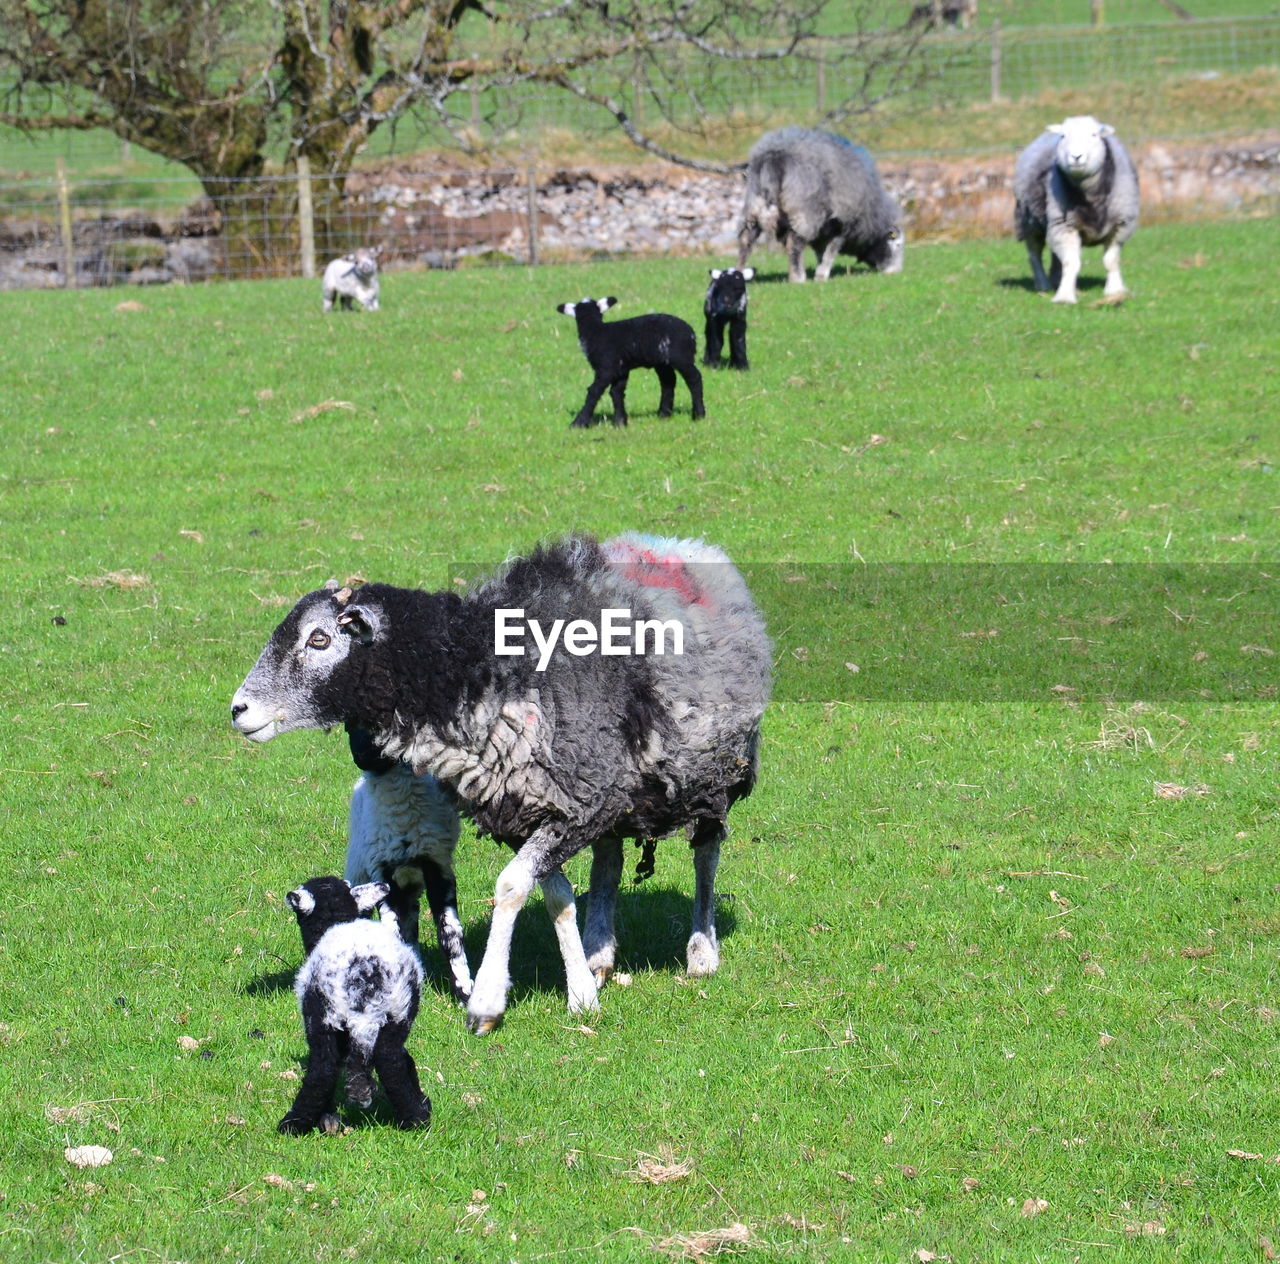 Sheep and lambs in a field in cumbria, england, uk